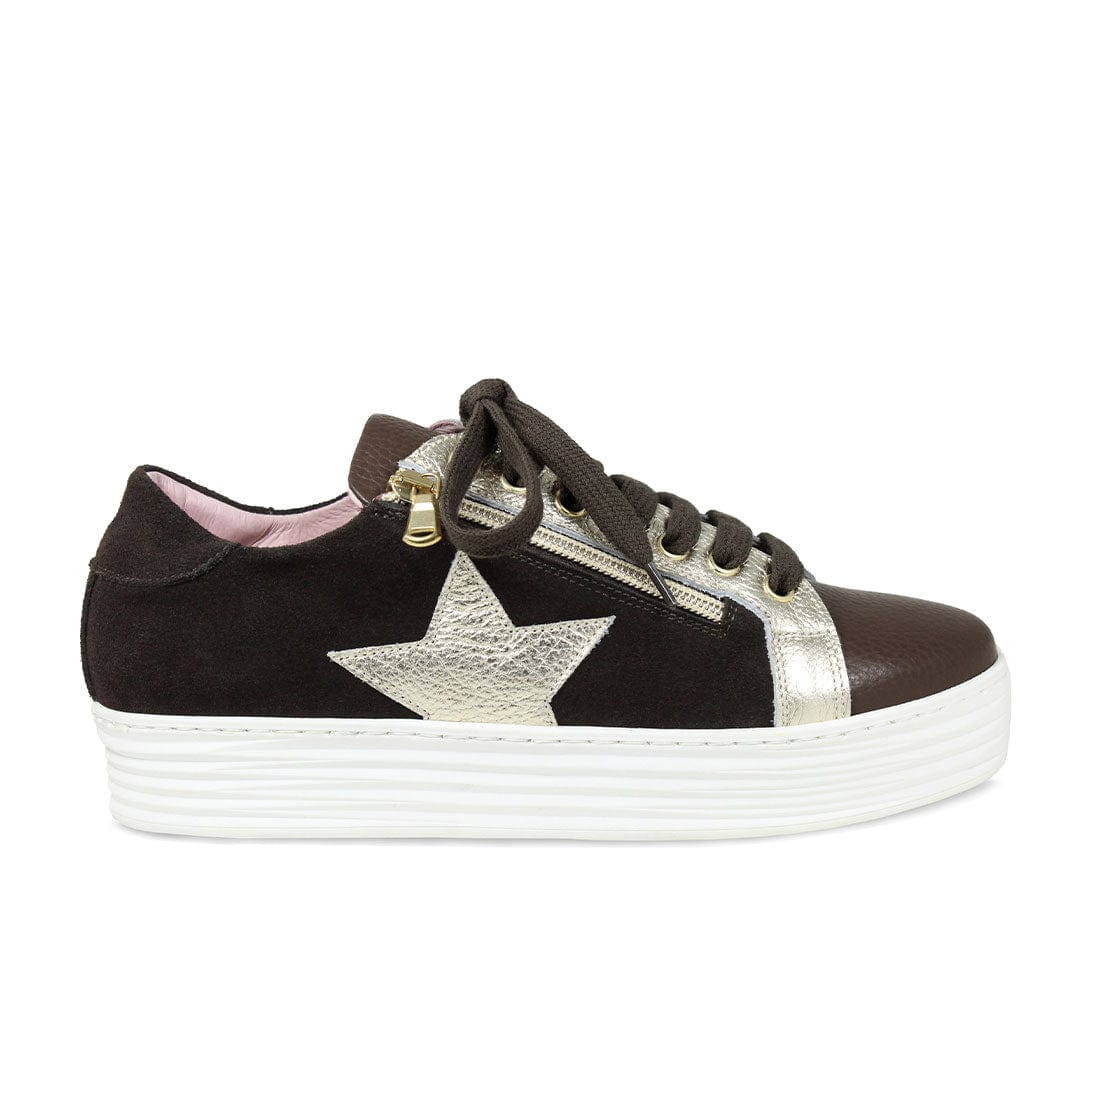 Star: Chocolate Brown Leather & Suede